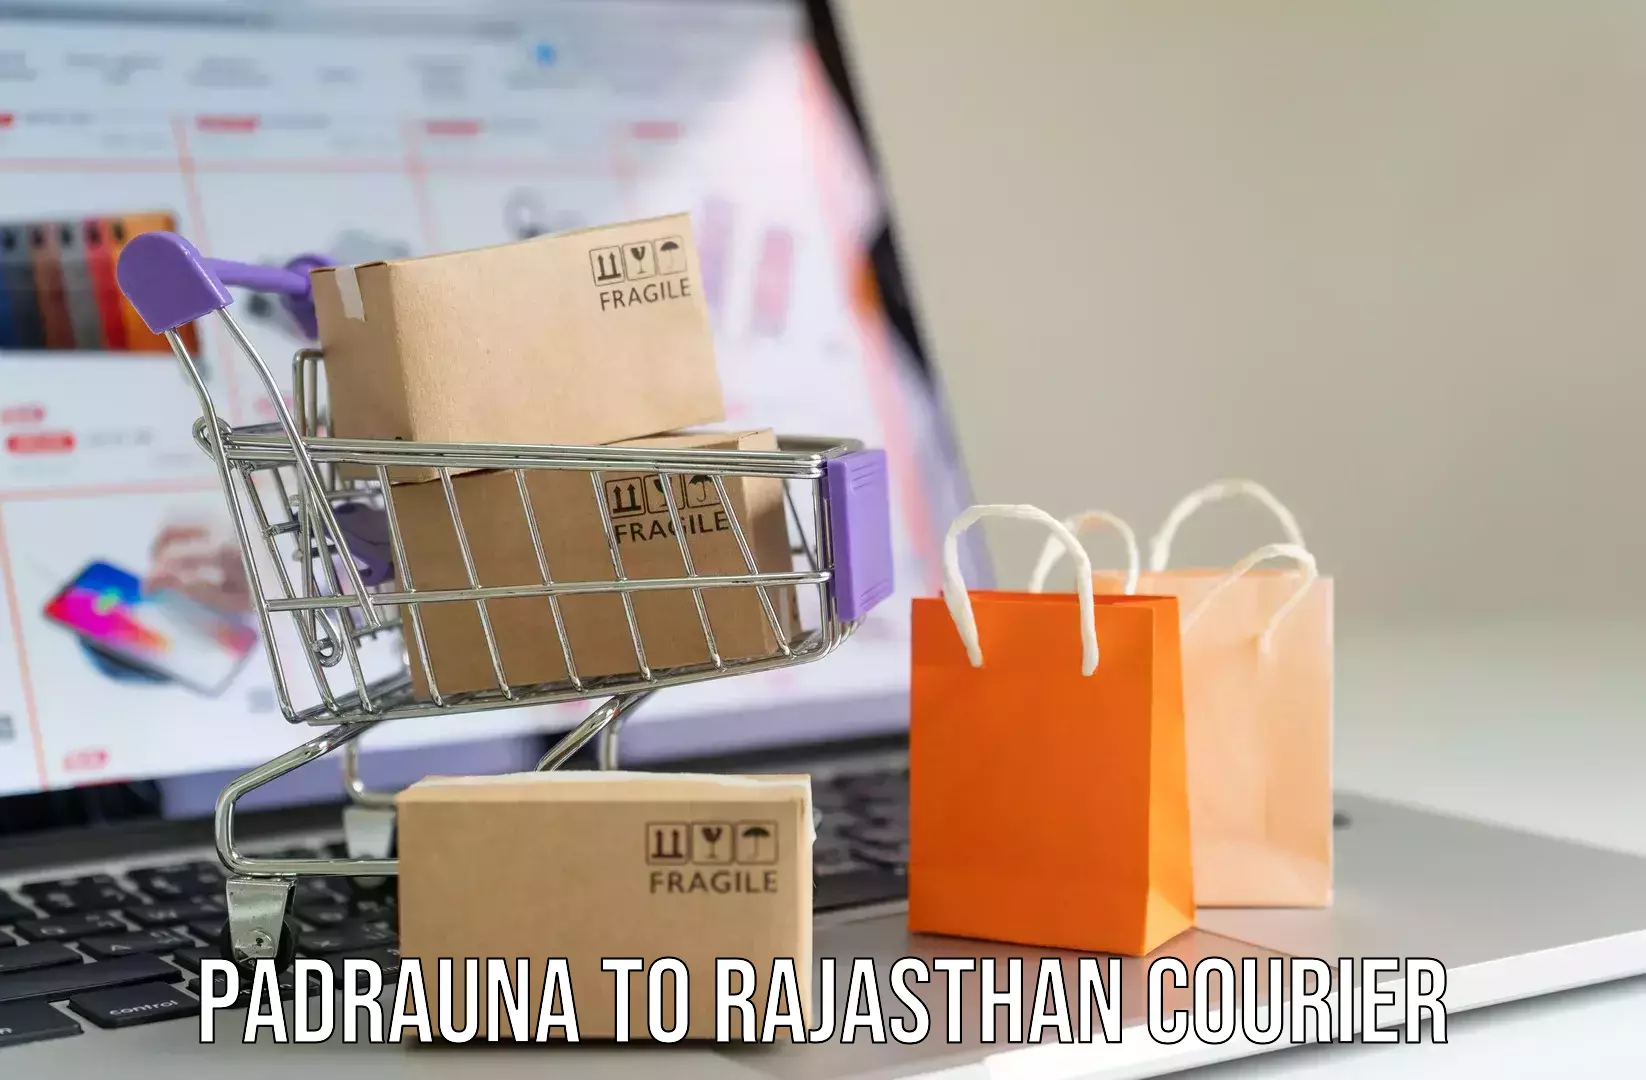 Luggage transport consulting Padrauna to Nohar